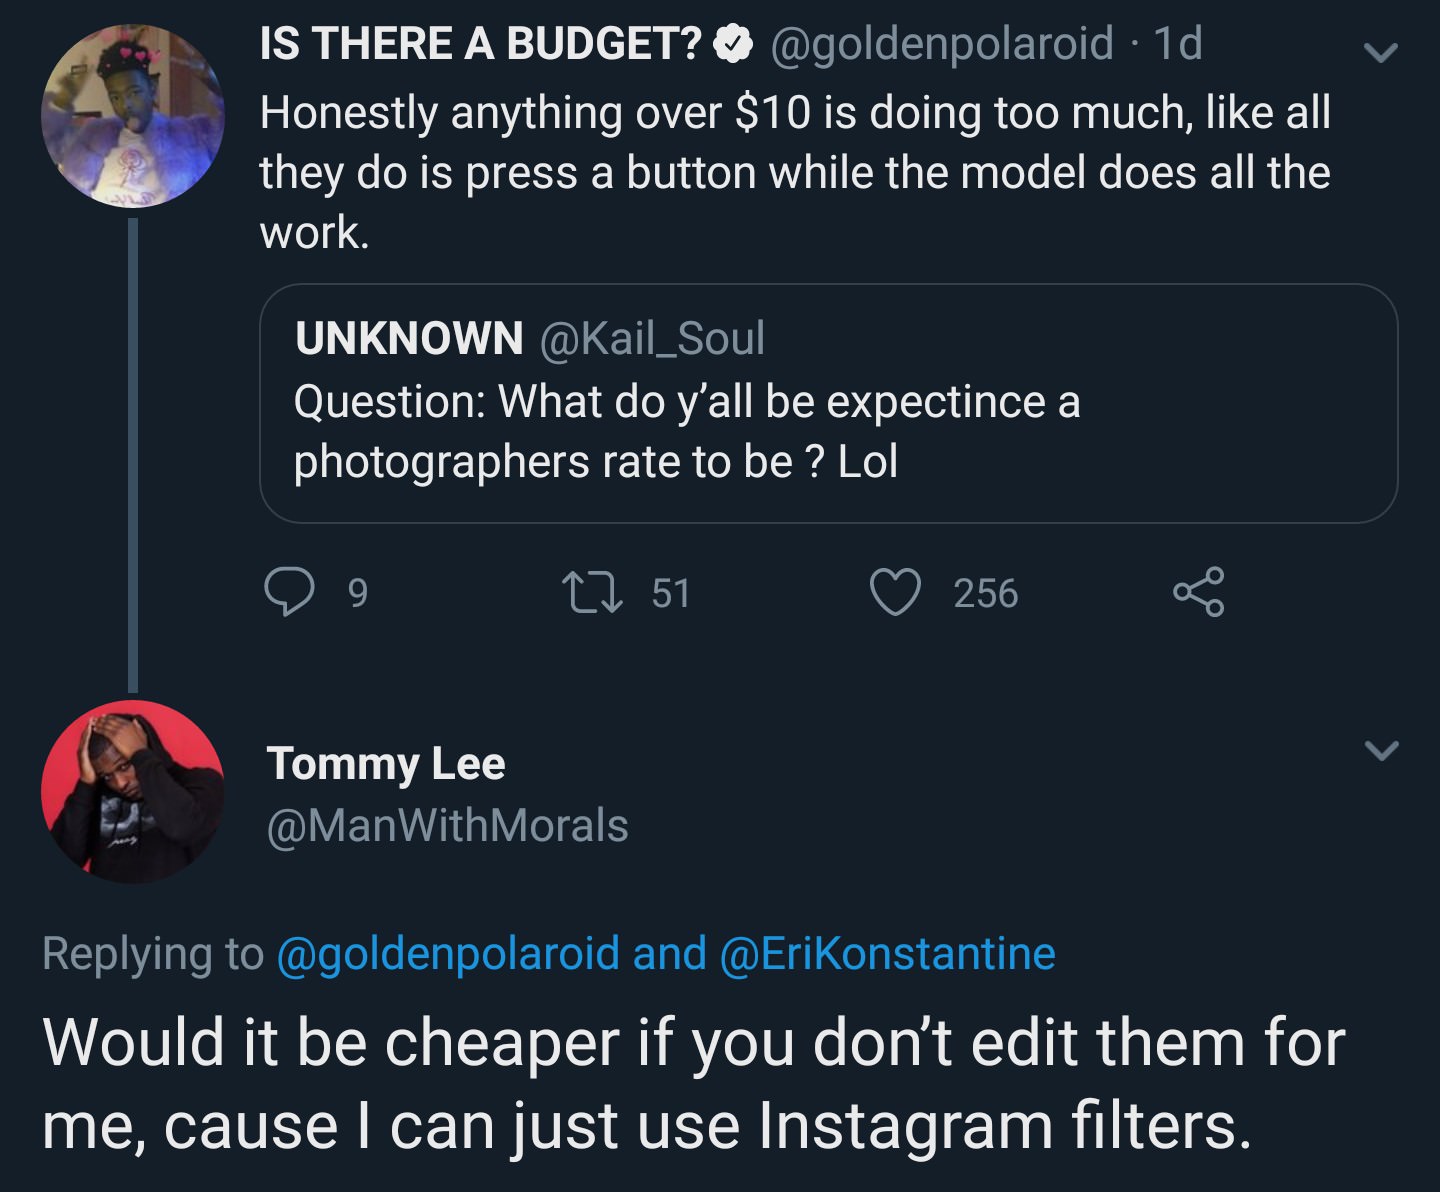 meme atmosphere - Is There A Budget? 1d Honestly anything over $10 is doing too much, all they do is press a button while the model does all the work. Unknown Question What do y'all be expectince a photographers rate to be ? Lol 9 9 22 51 256 Tommy Lee Mo